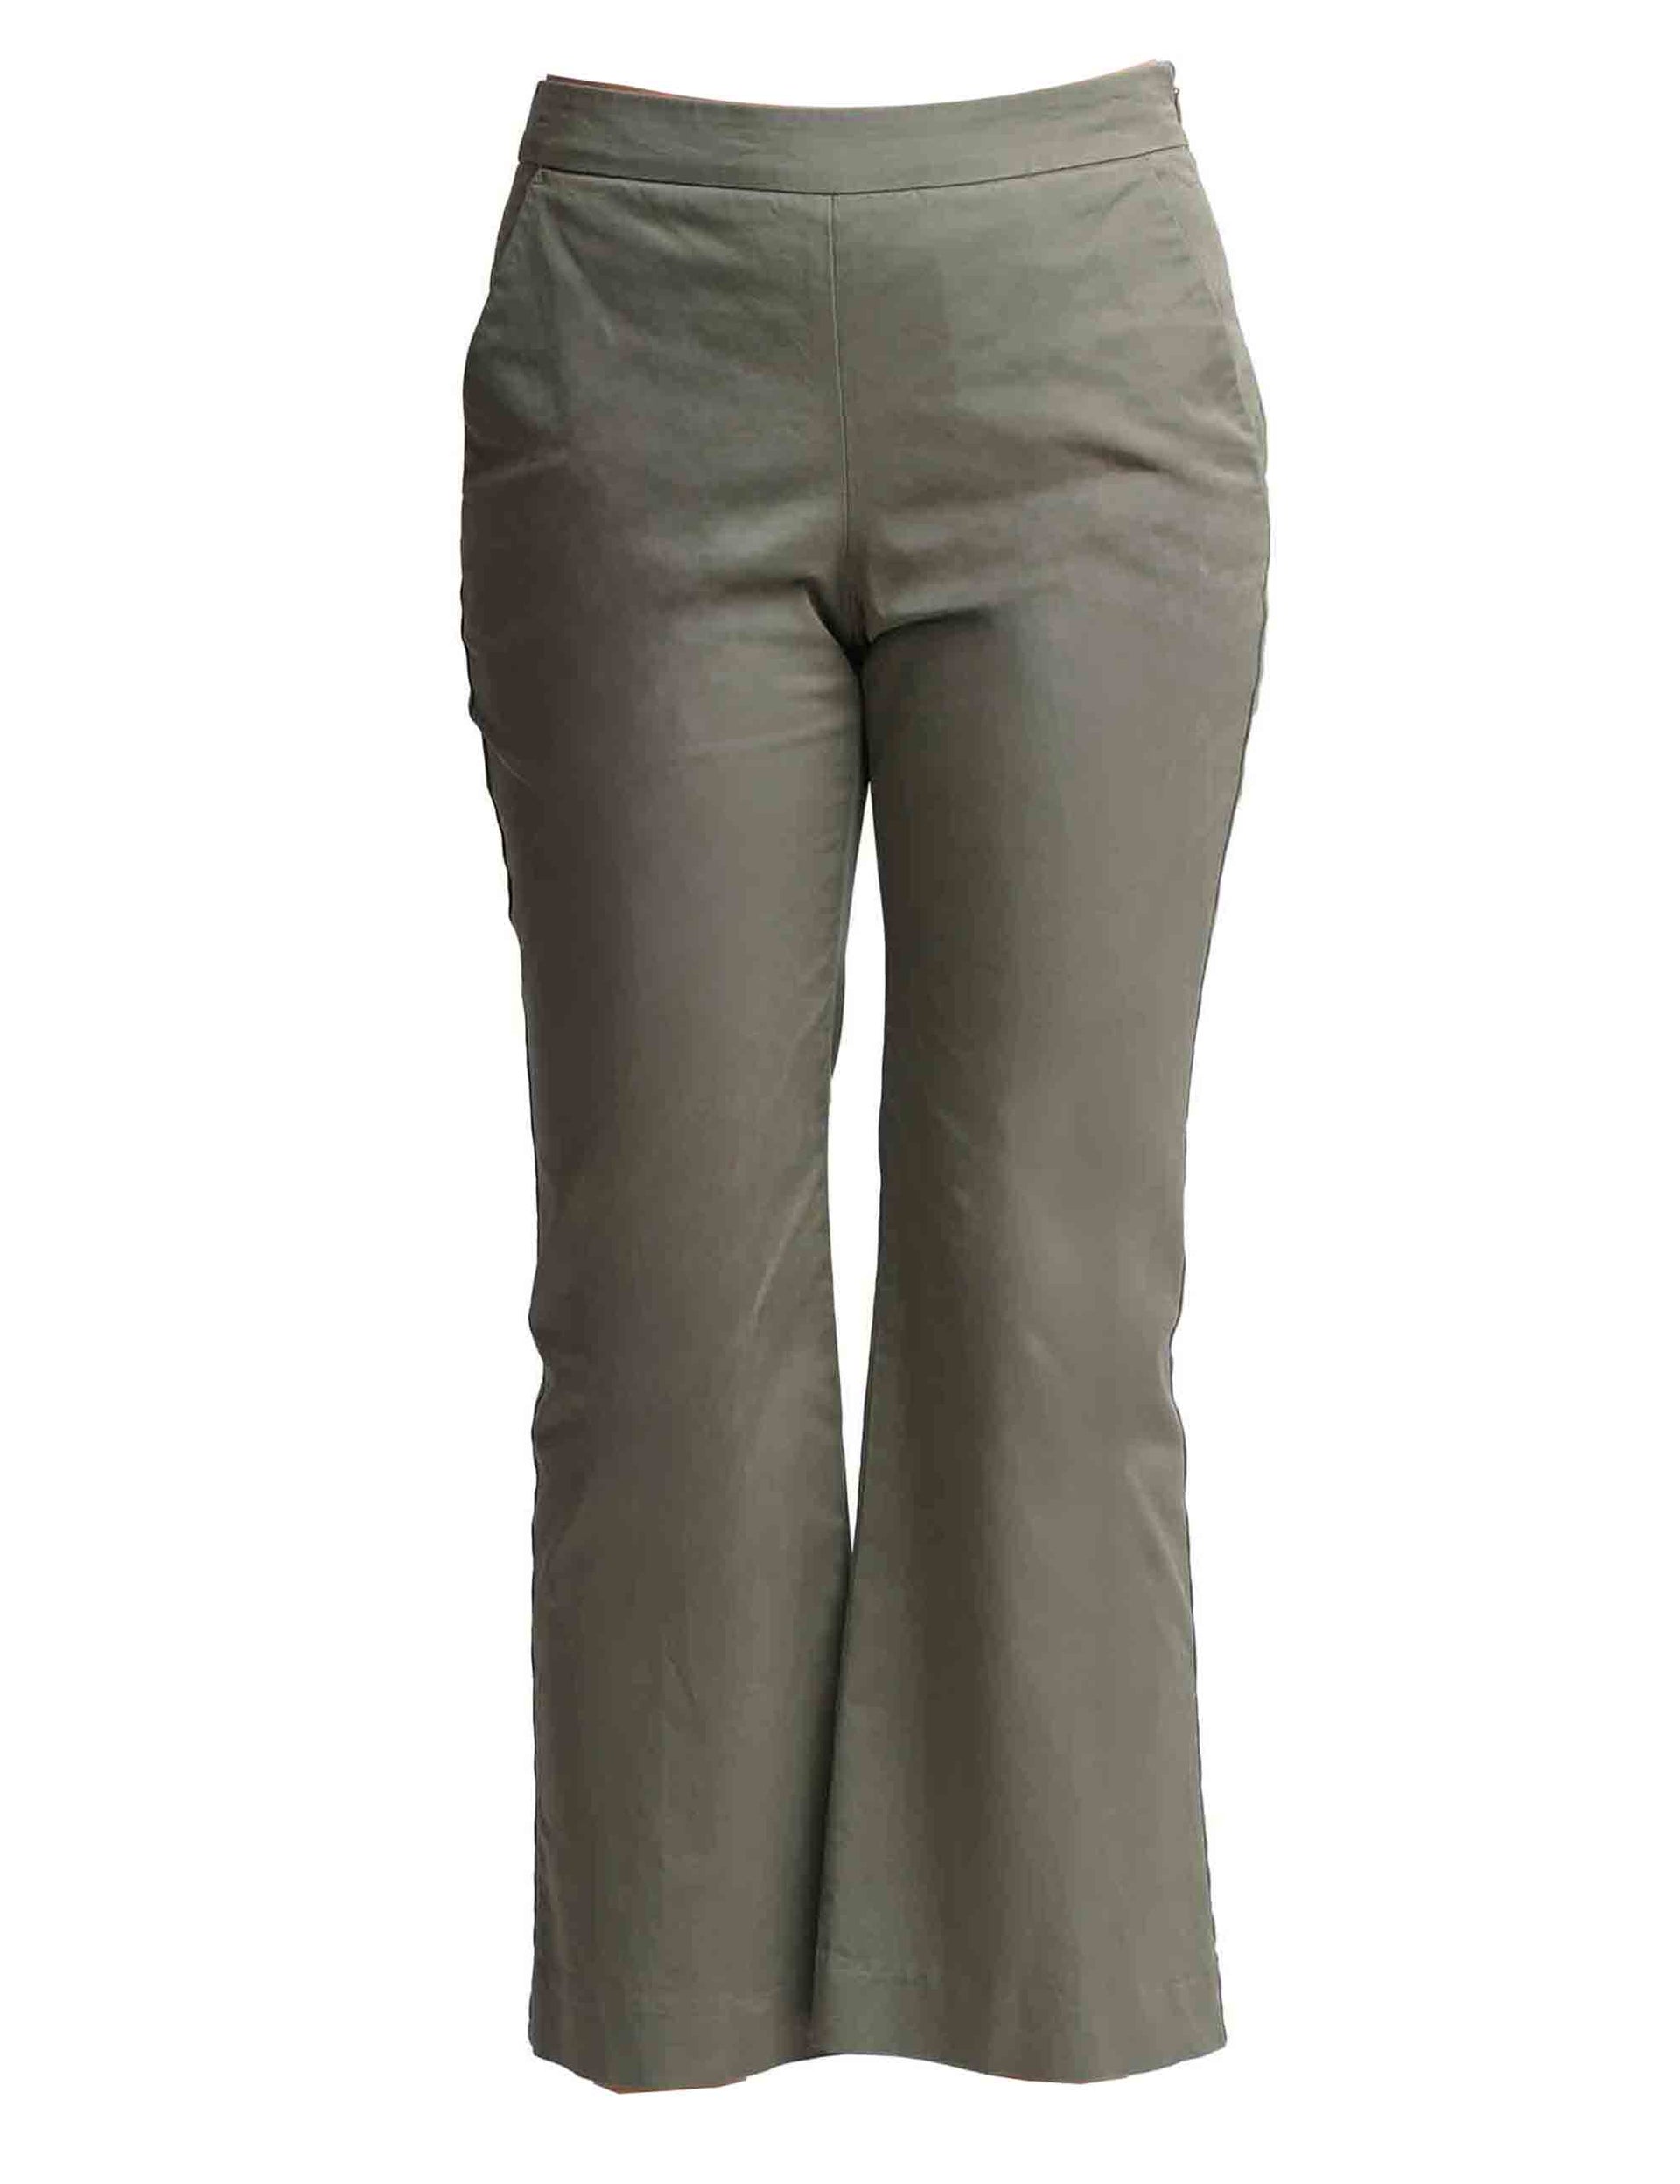 Precious women's trousers in green cotton with flared leg at the bottom